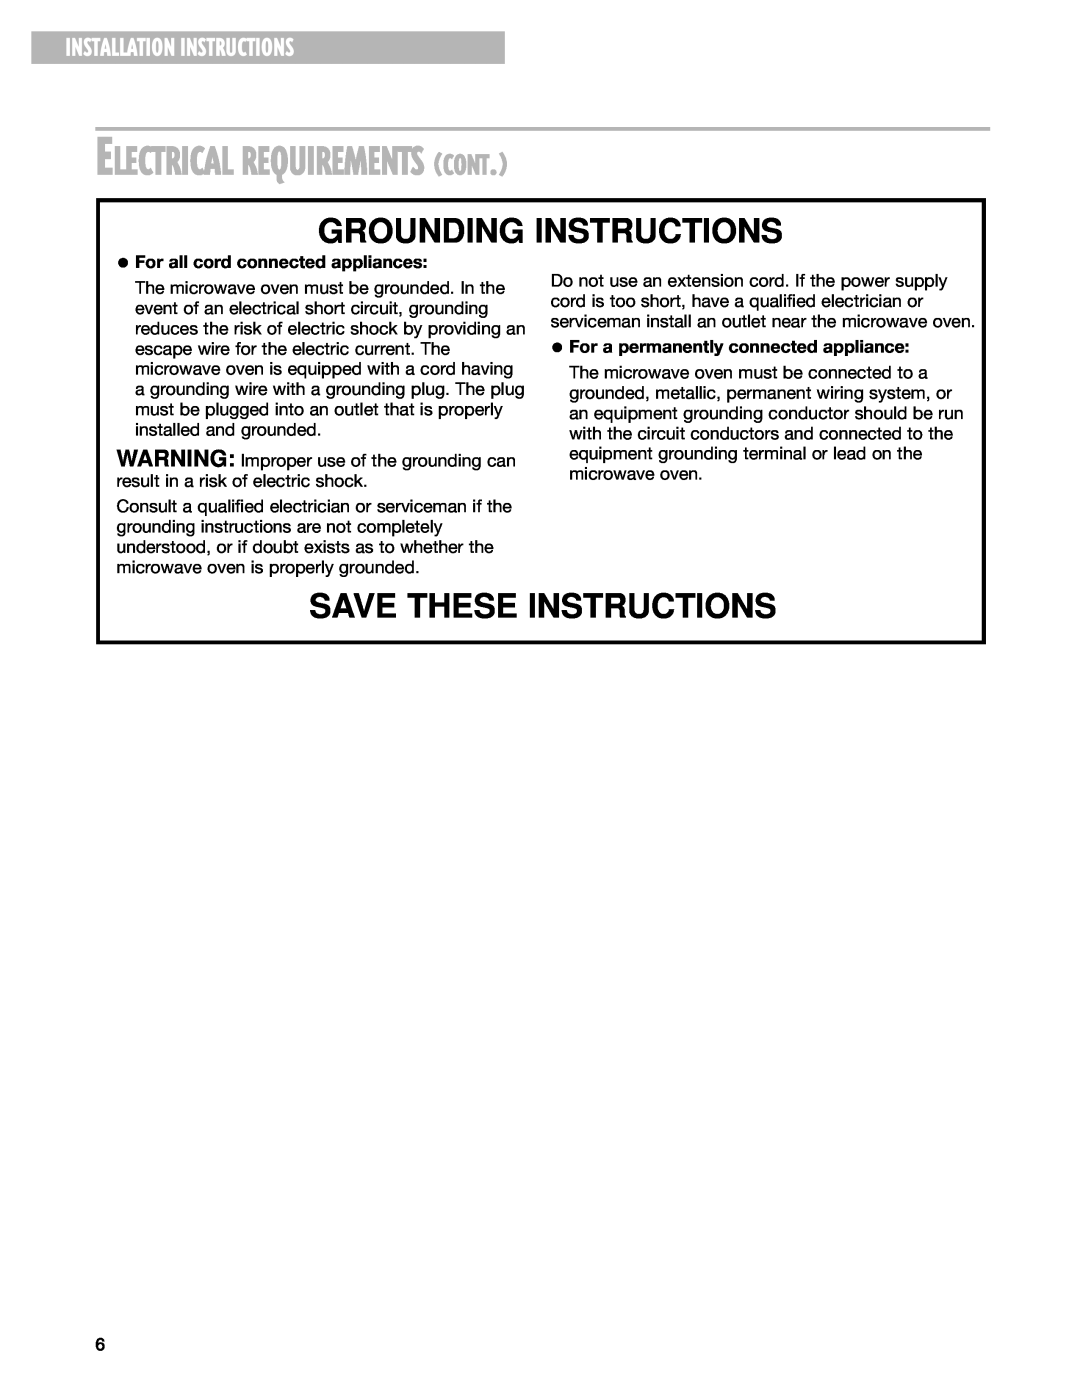 Whirlpool MT3185SH Electrical Requirements Cont, Grounding Instructions, Installation Instructions 